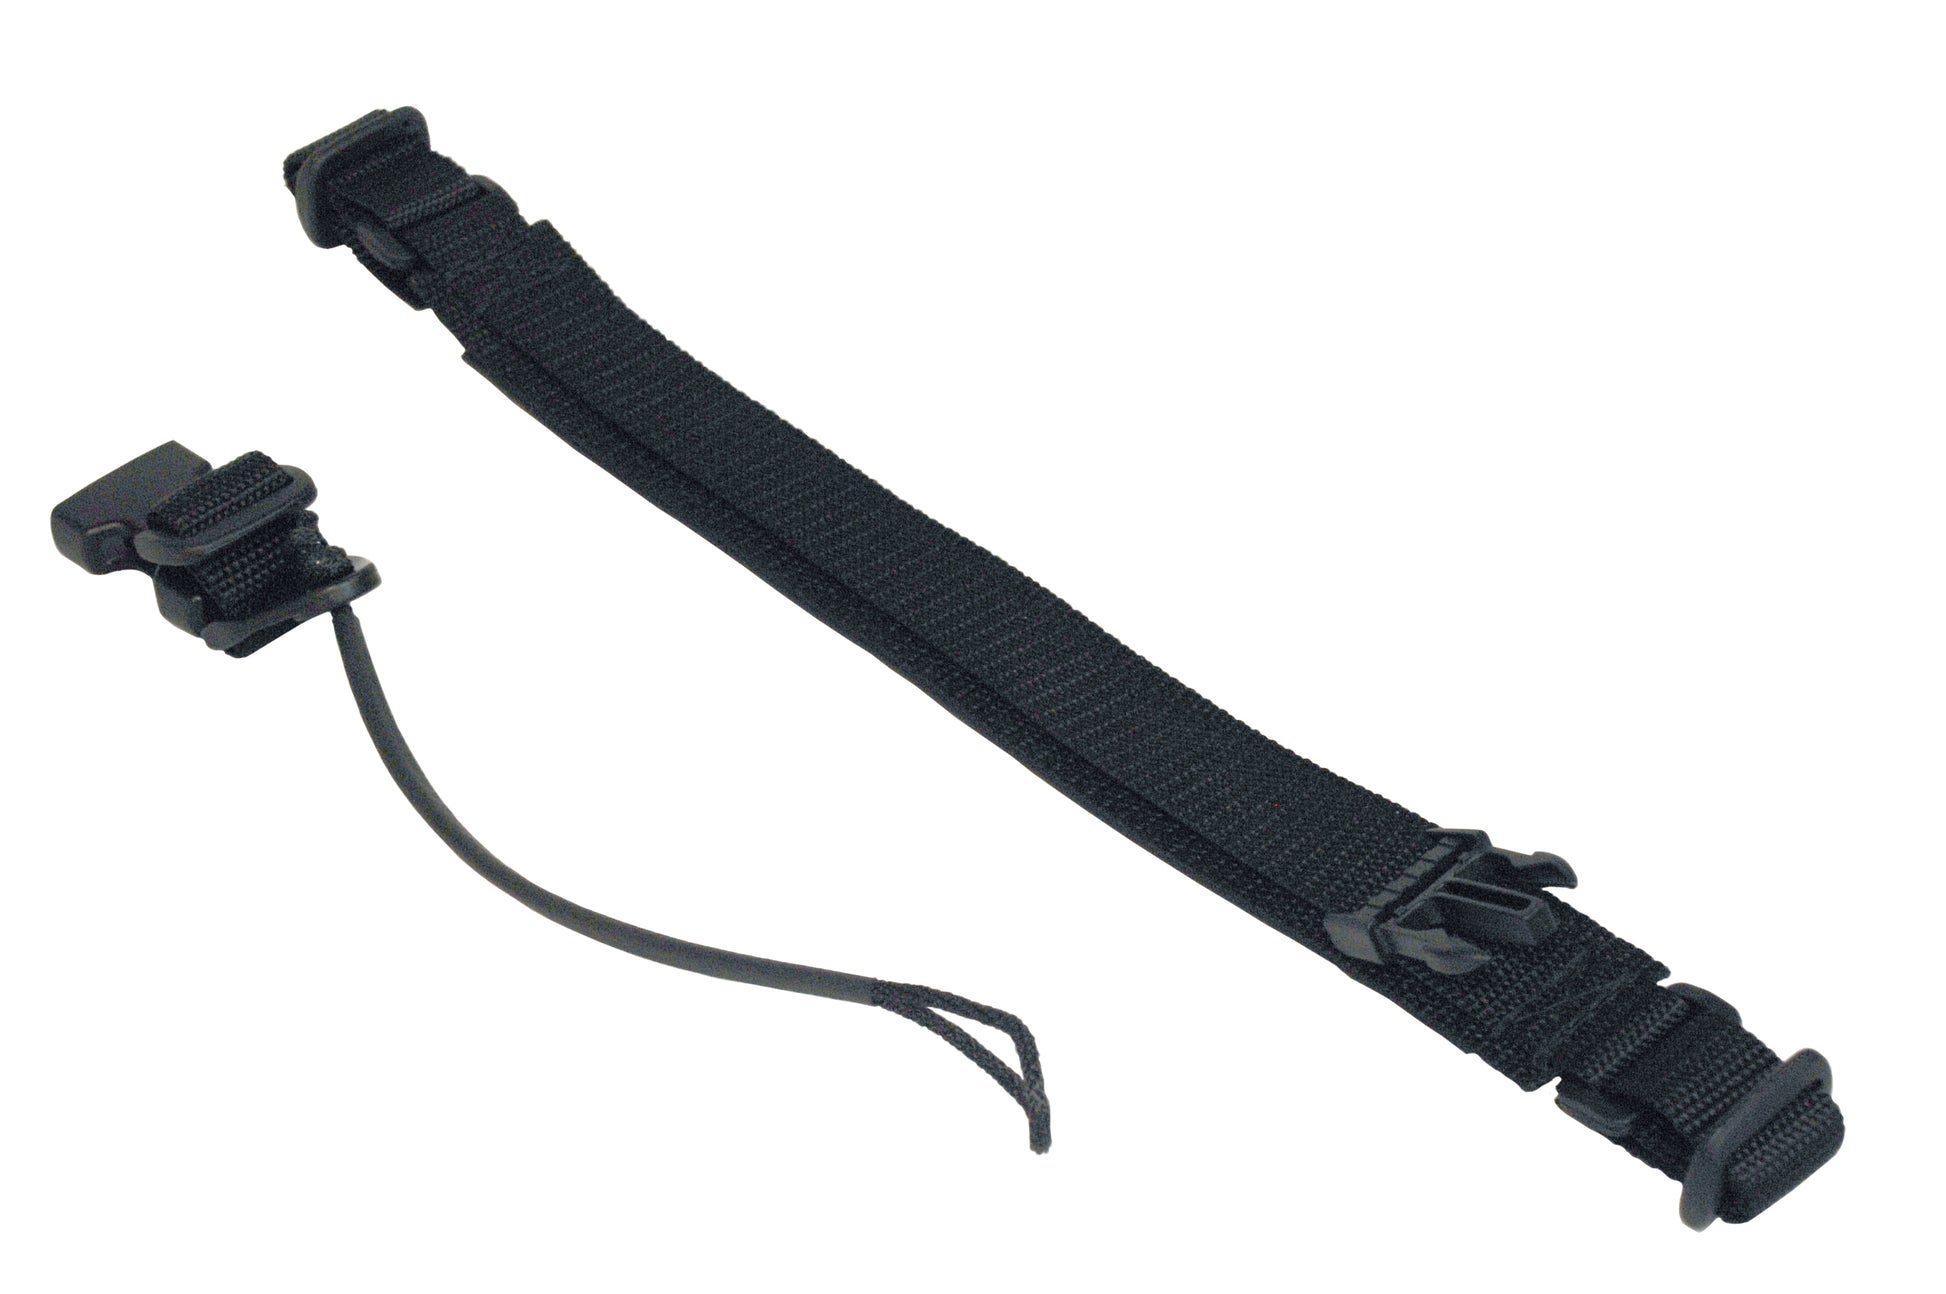 EXO-13 Tactical single point sling